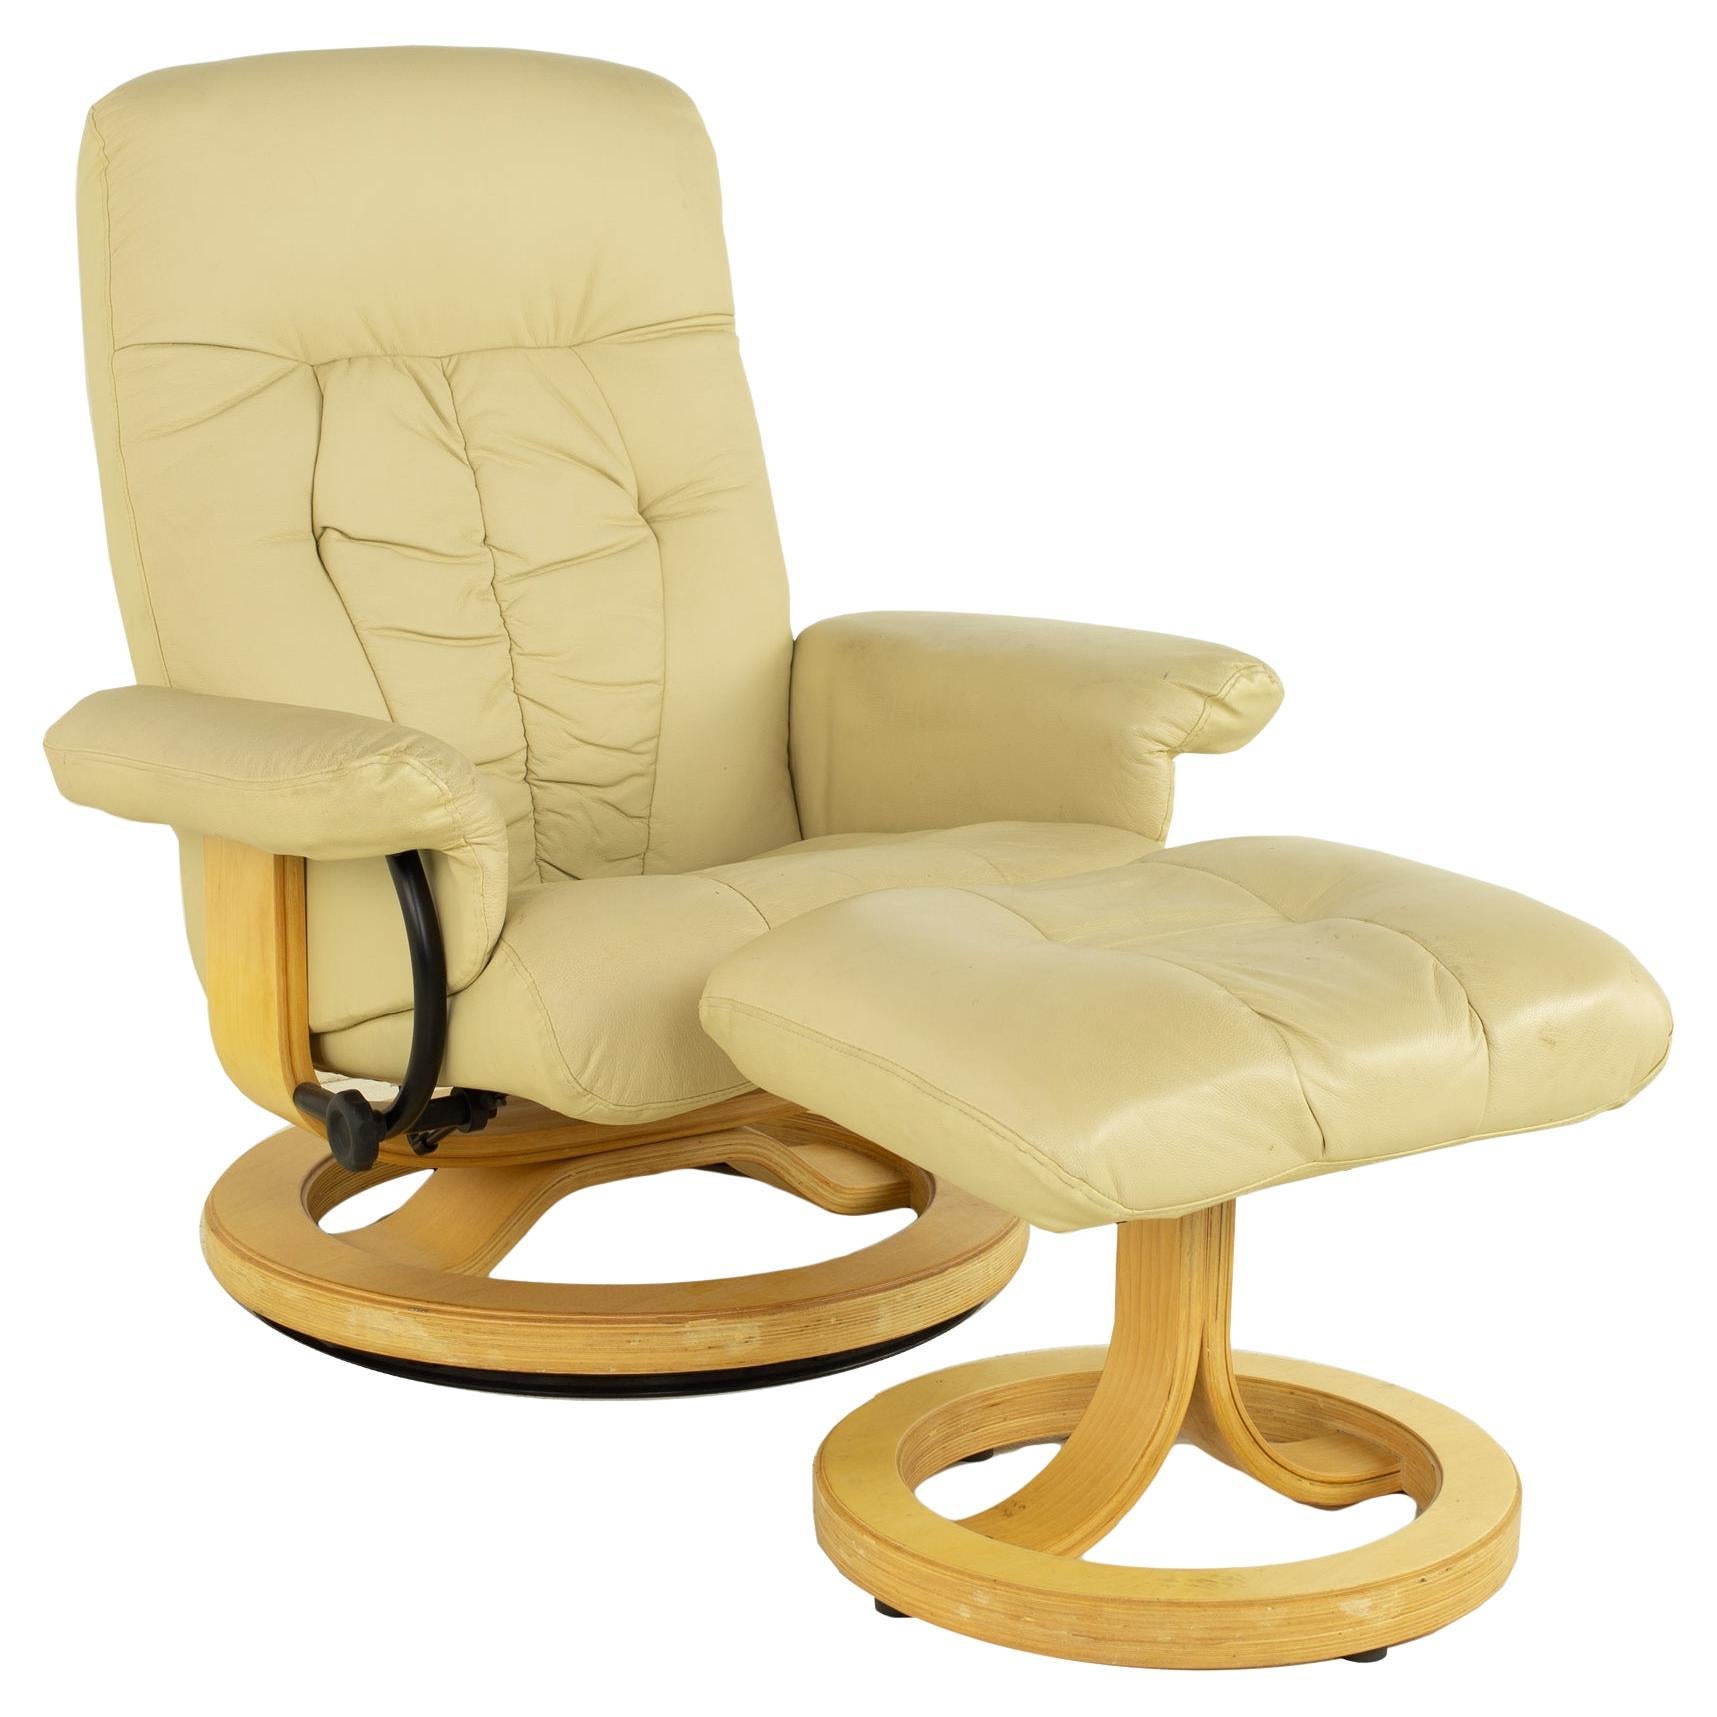 Ekornes Stressless Style Mid-Century Leather Lounge Chair and Ottoman